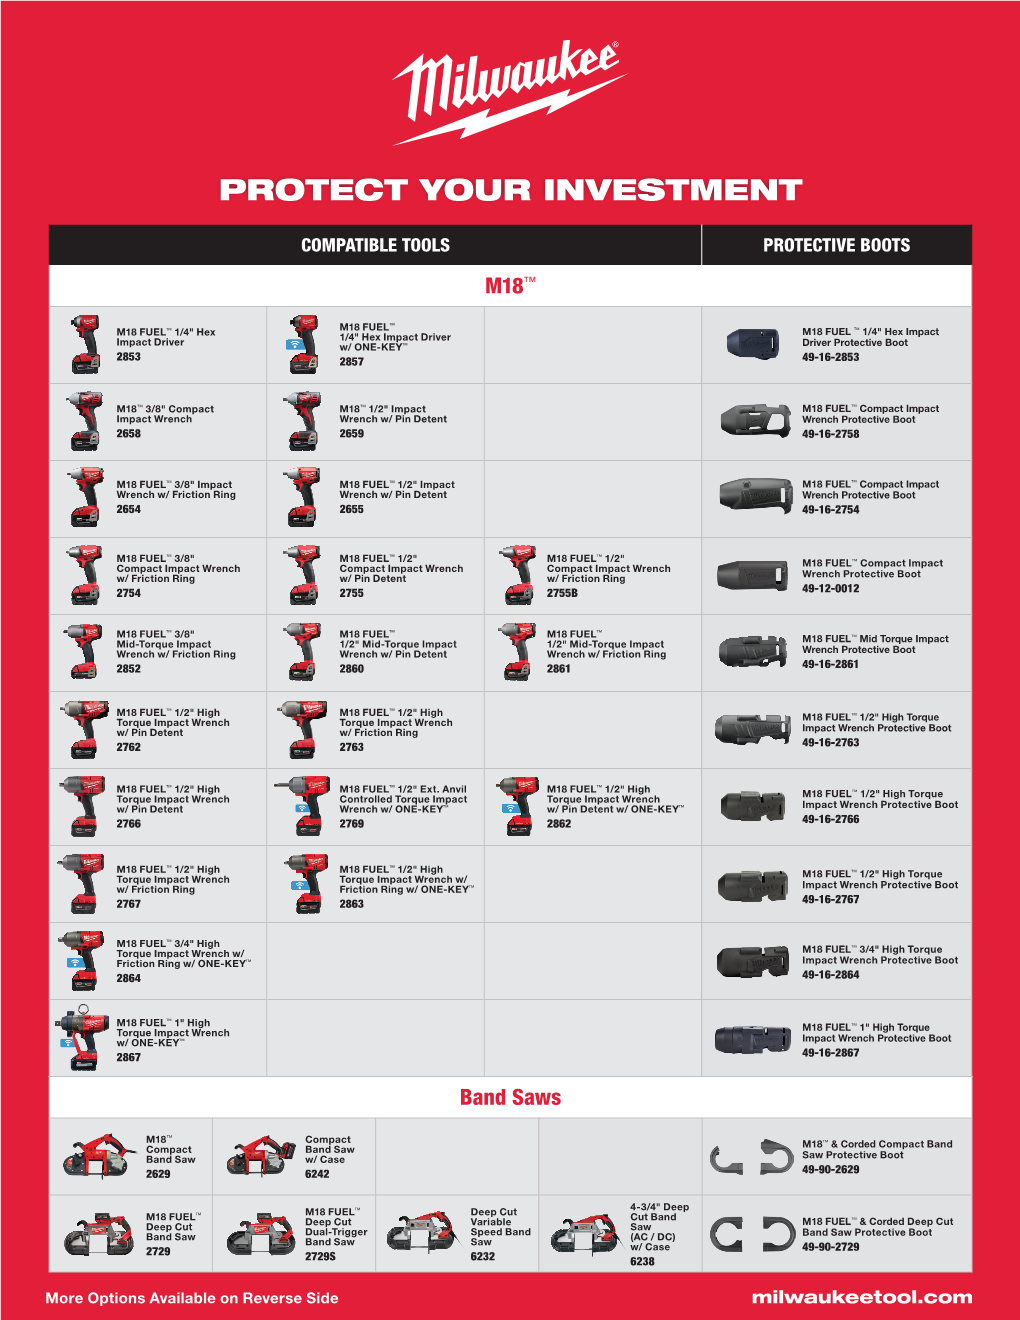 Protect Your Investment